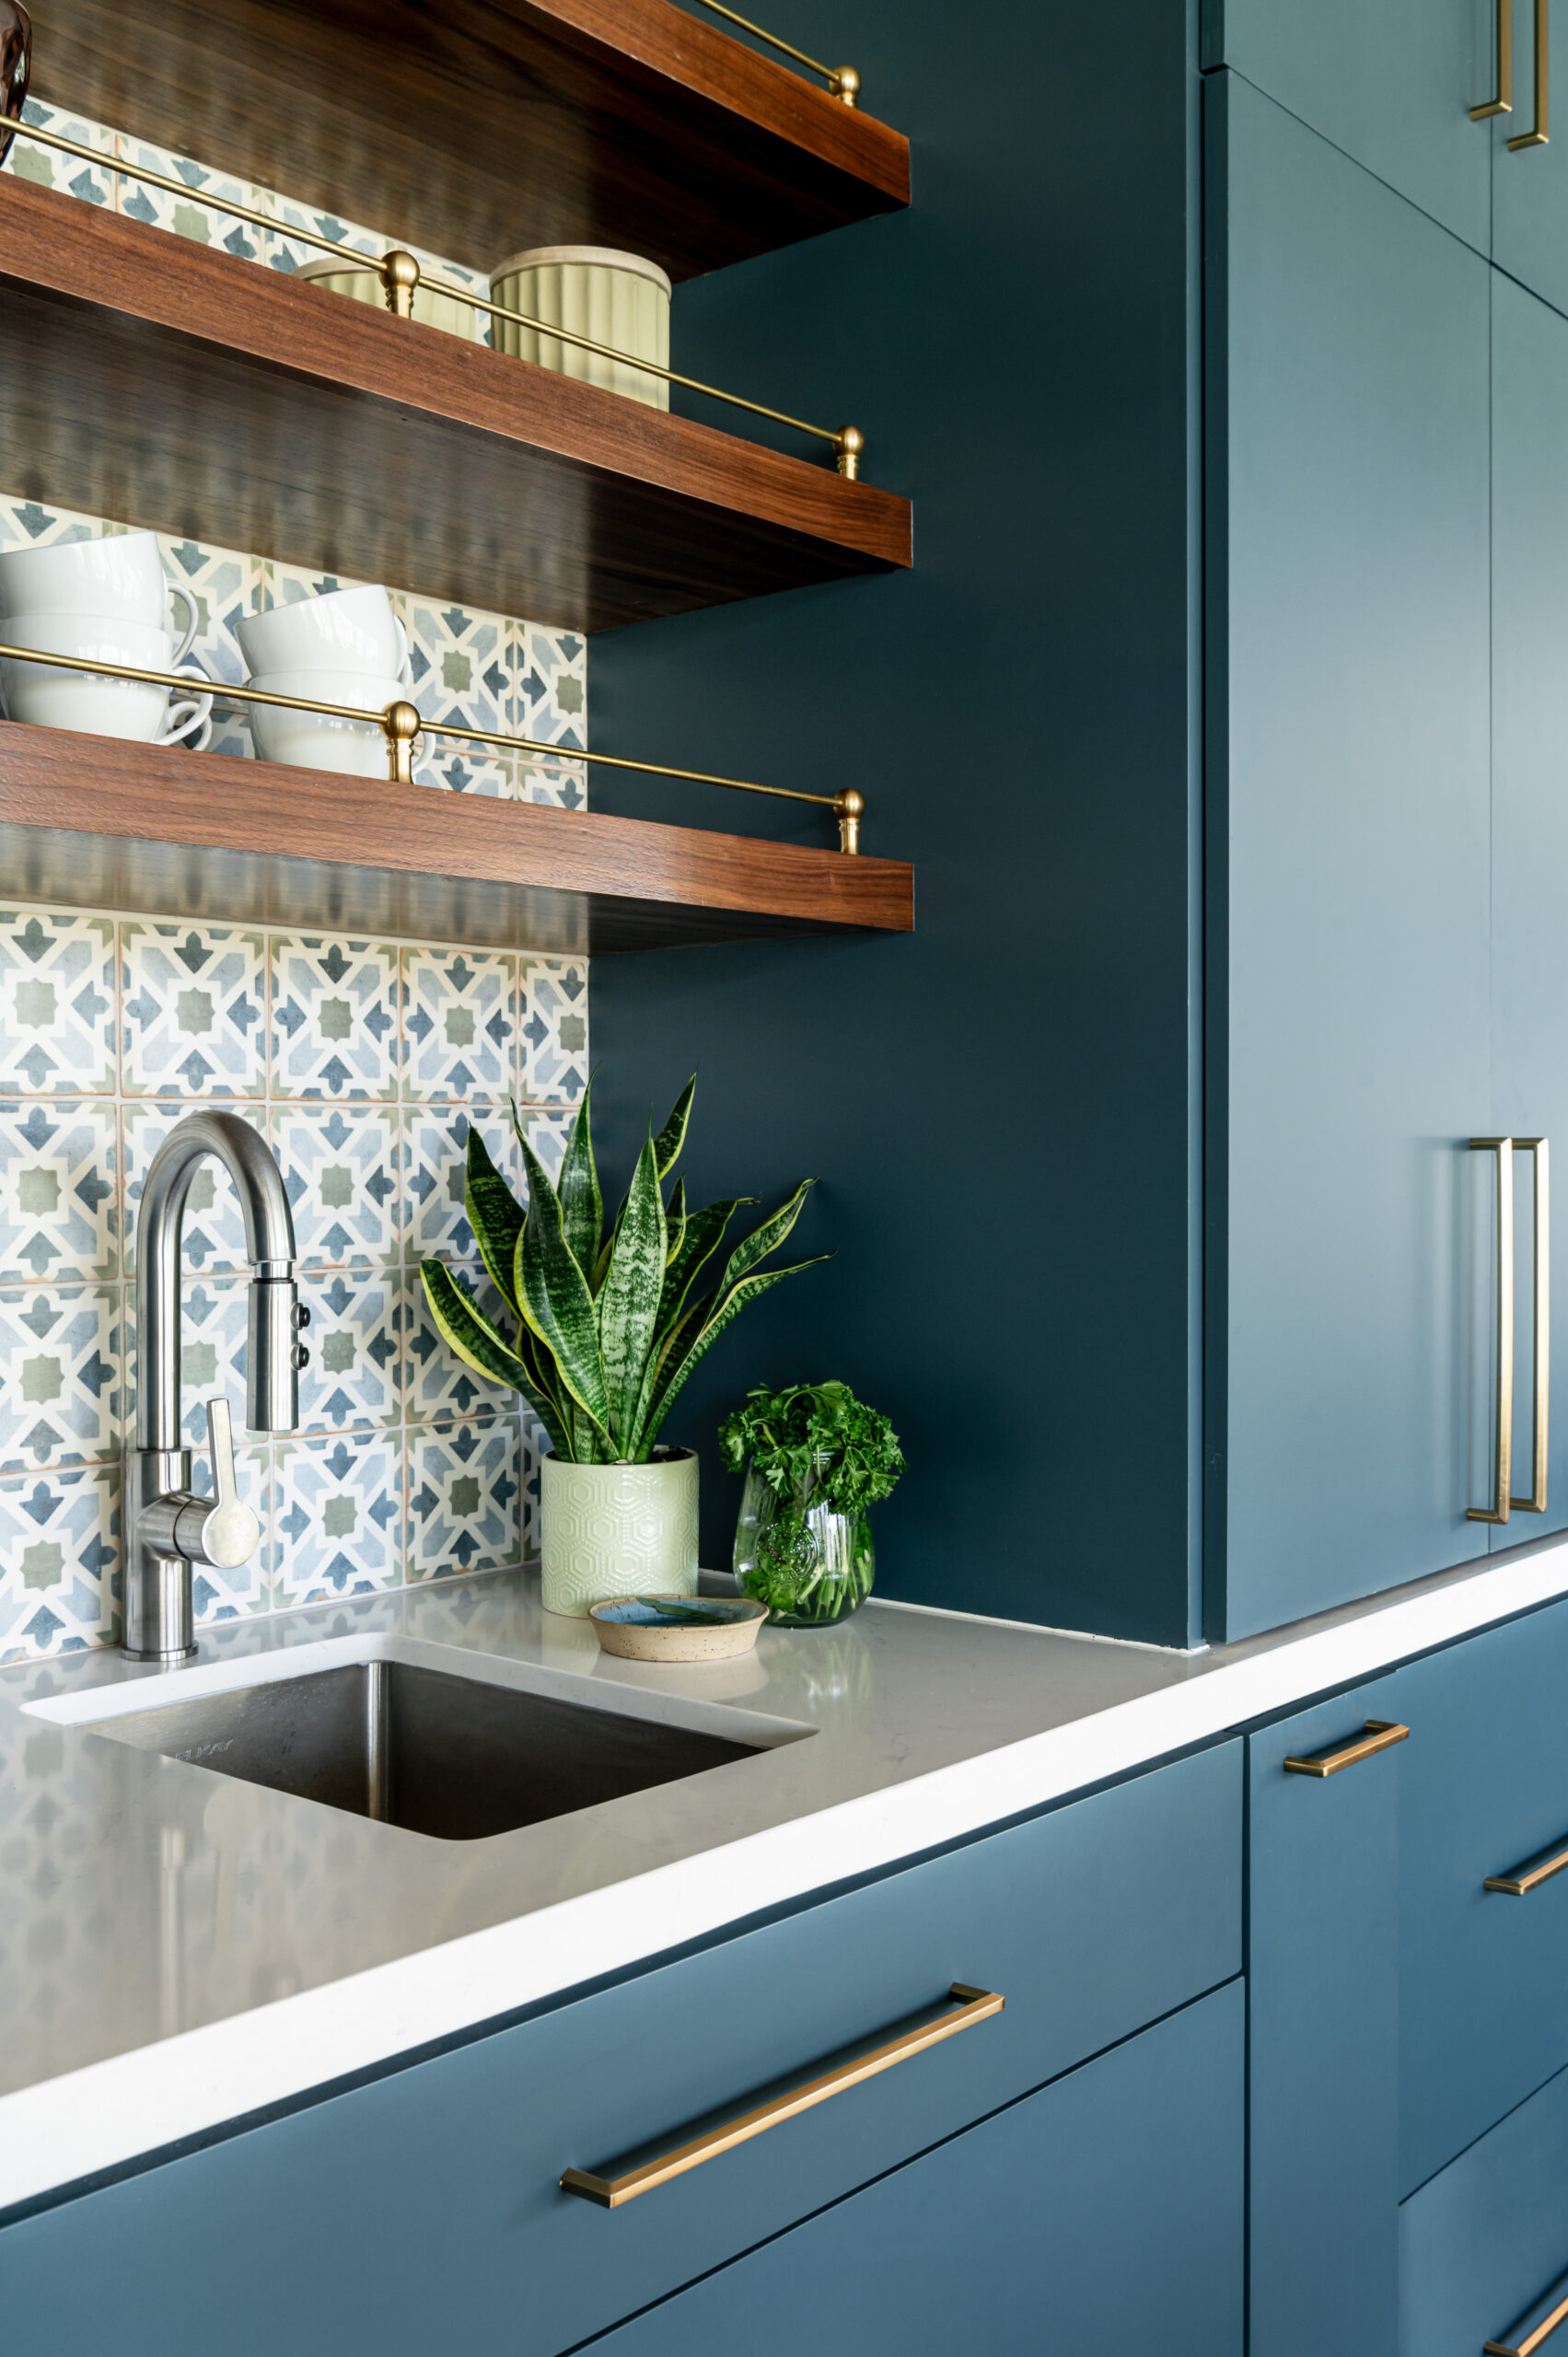 Midcentury kitchen interior design, with blue cabinetry